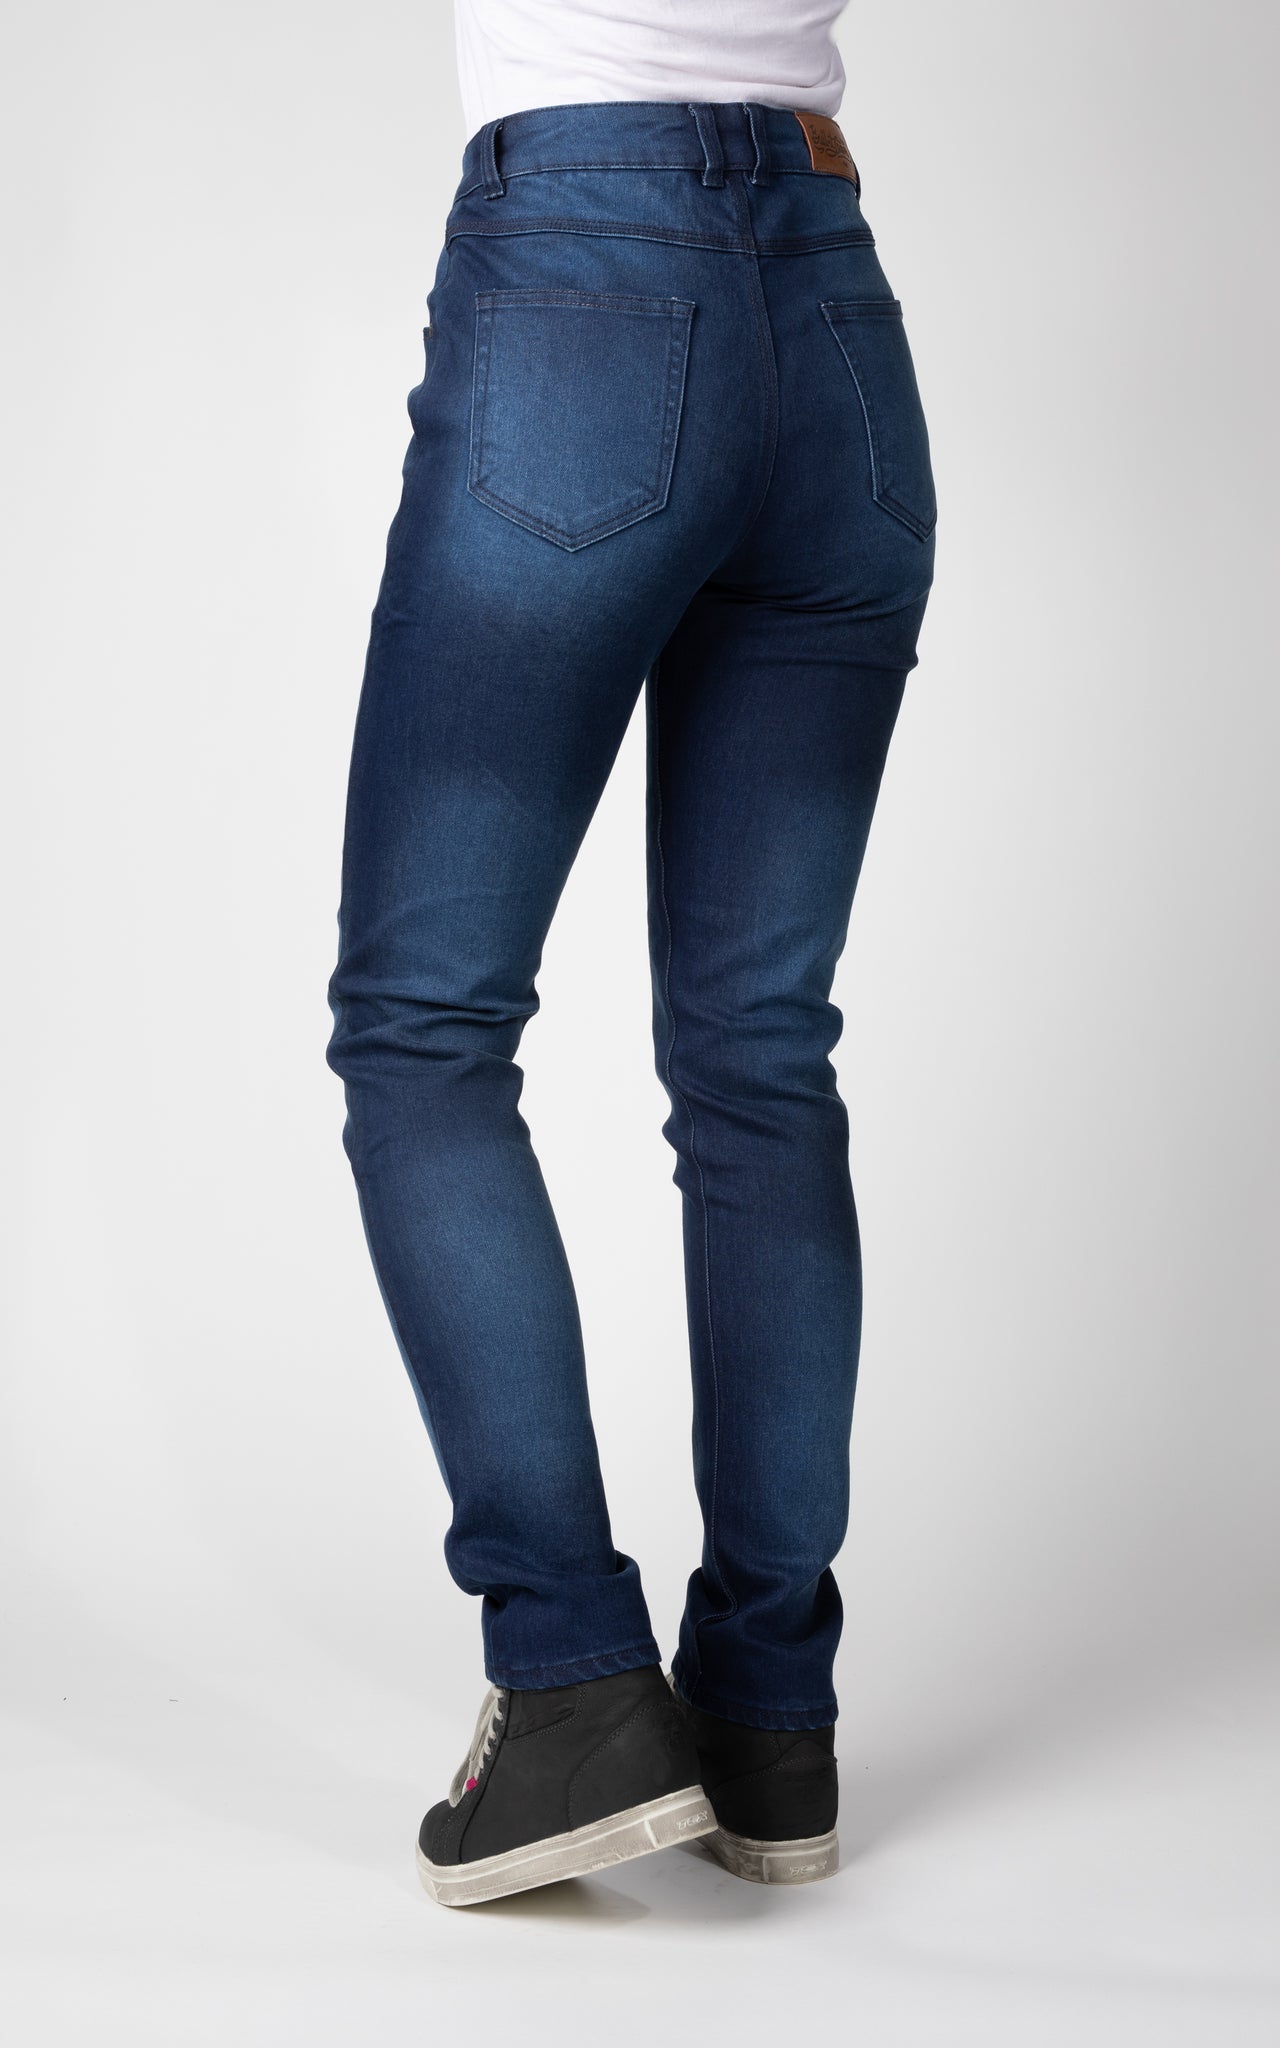 Woman&#39;s legs from behind wearing blue lady motorcycle jeans from Bull-it